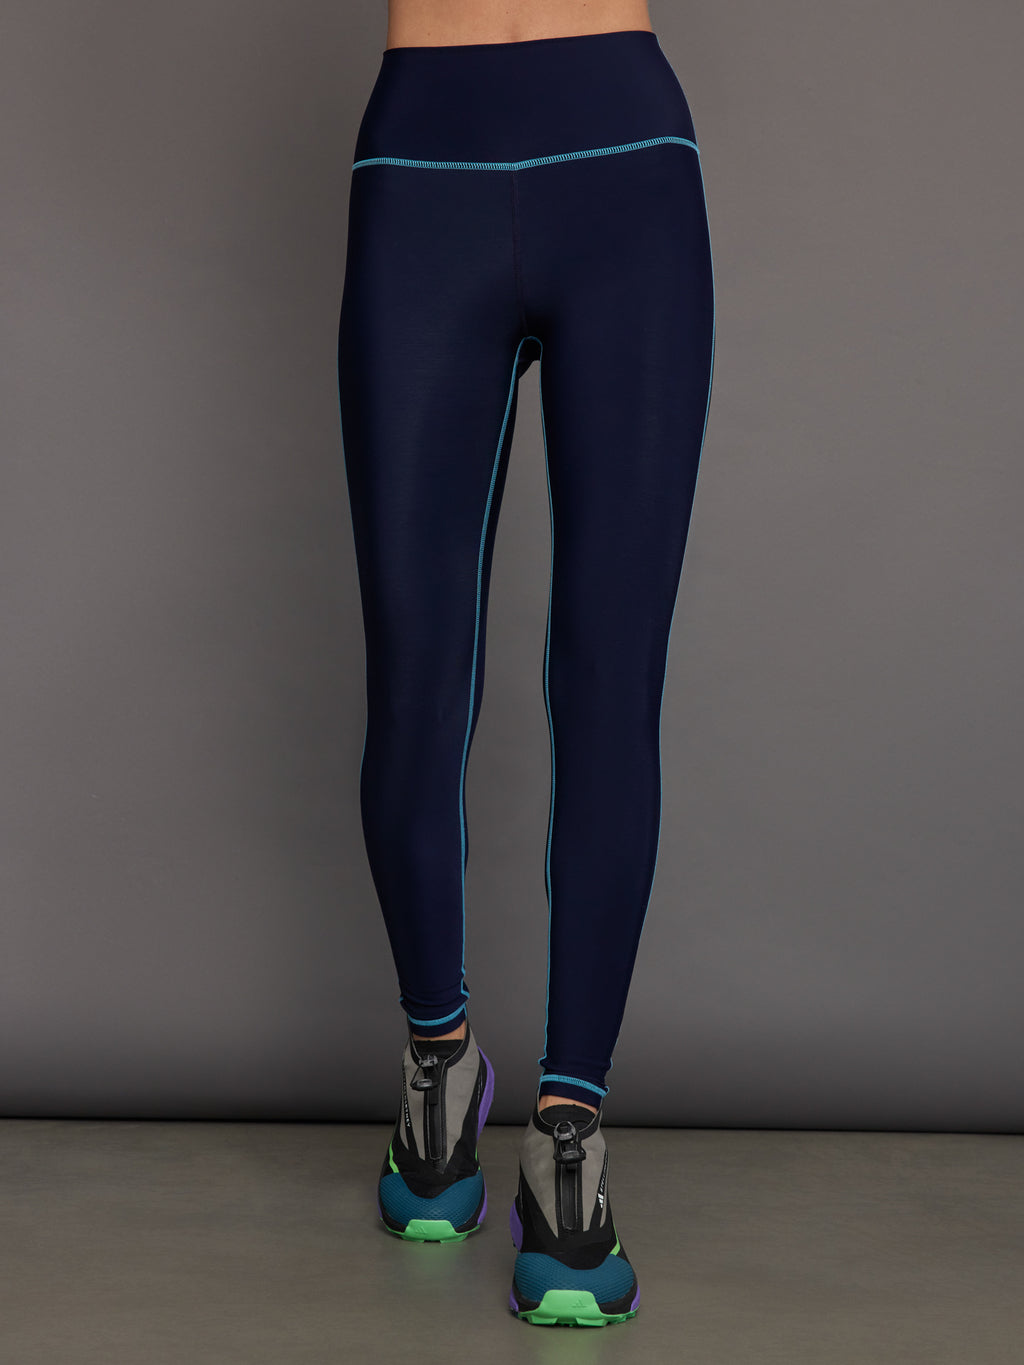 Back Rise / High Fleece Carbon38 Legging - Atoll Blue Navy with –